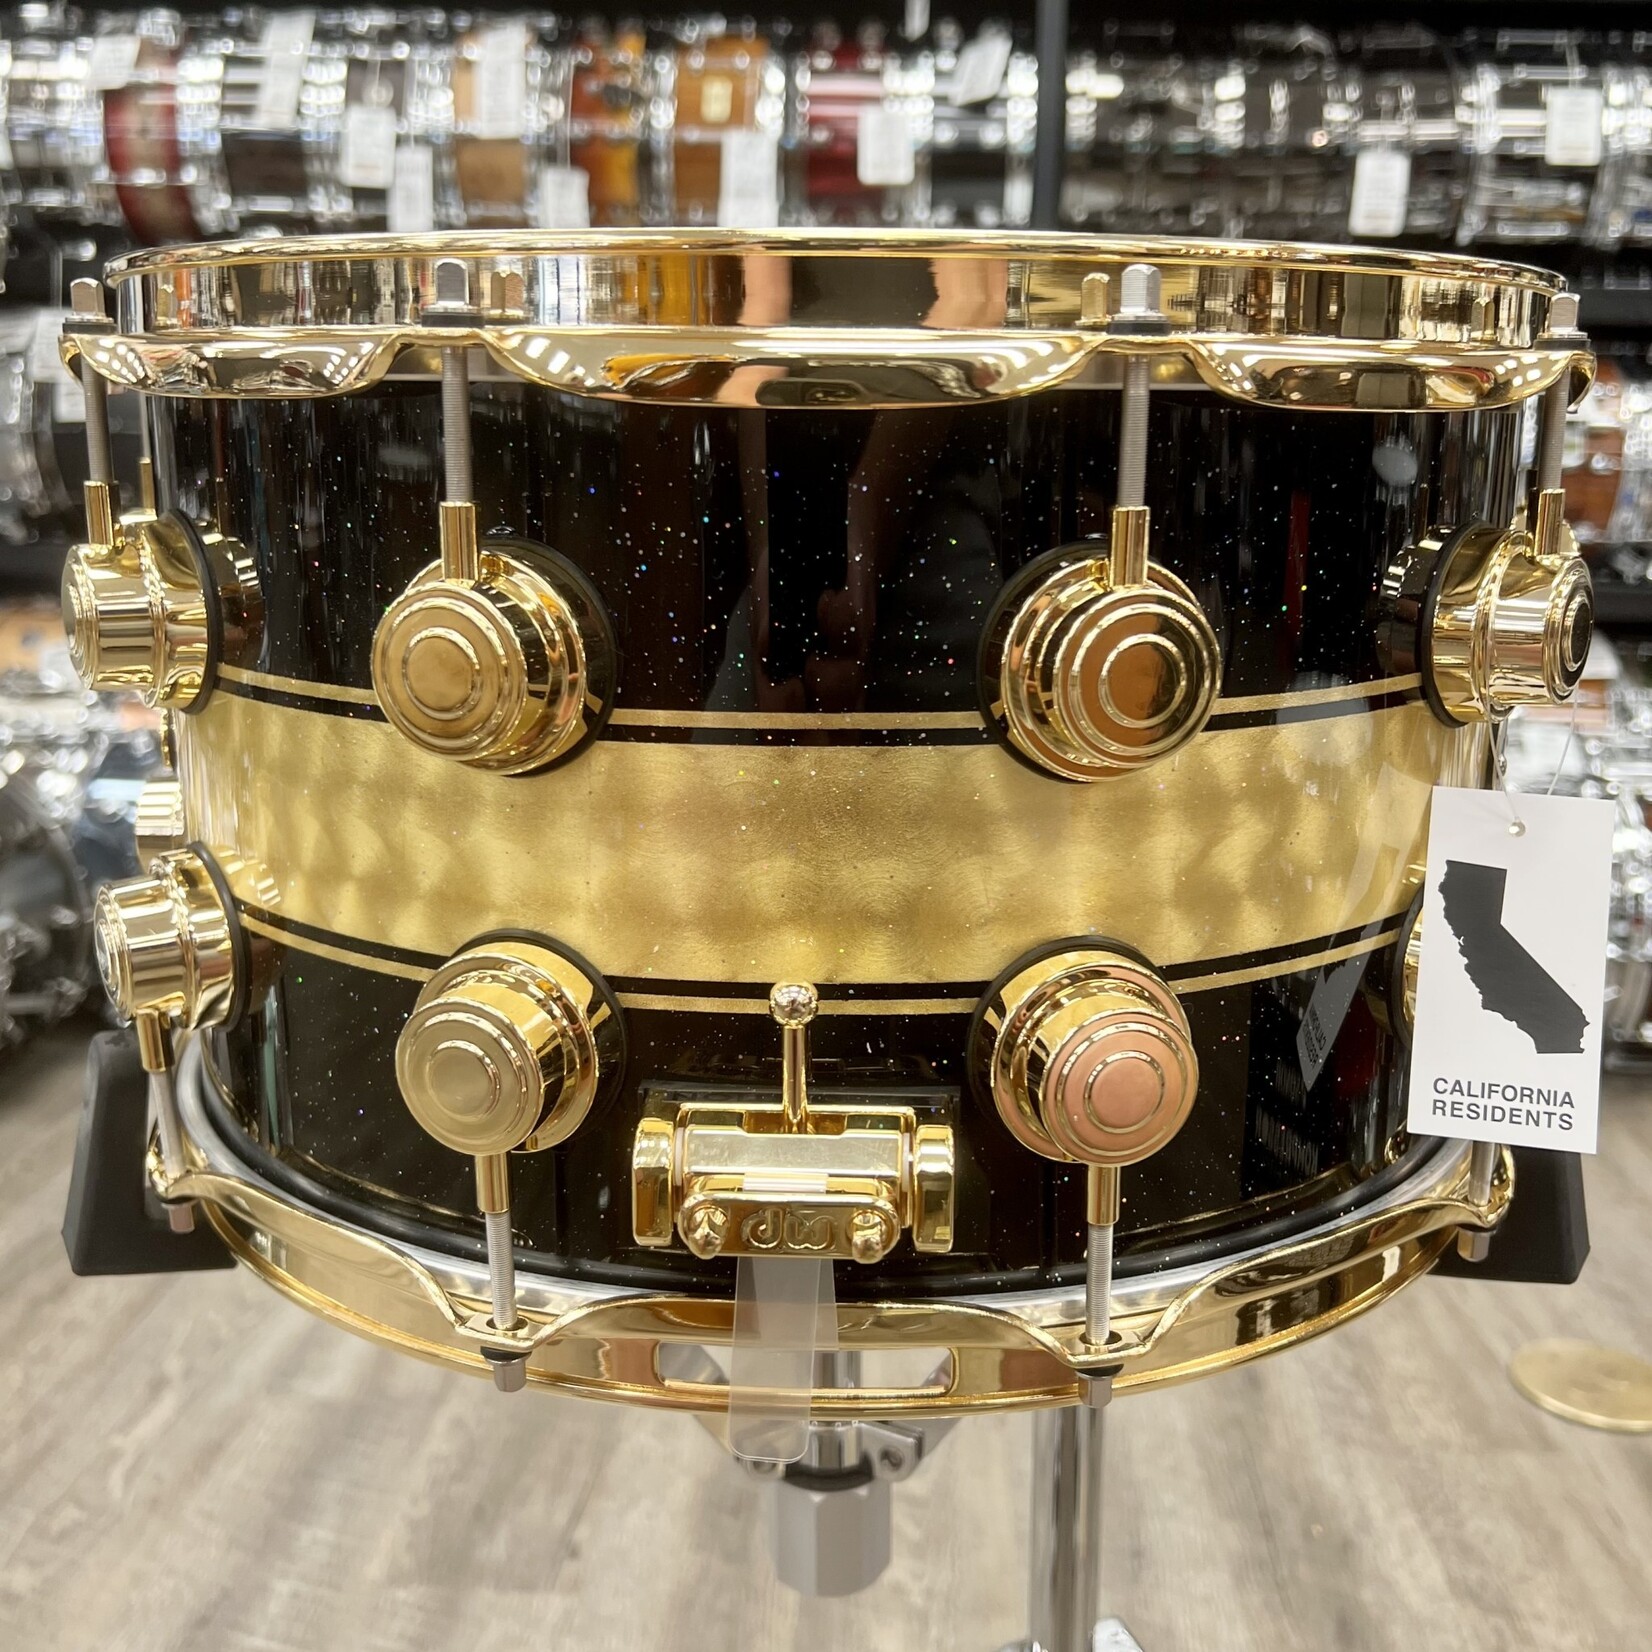 DW DW Collector's SSC Maple 8x14" Exotic Snare Drum (Black Mirra w/ Gold Leaf Rally Stripe and Gold Hardware)